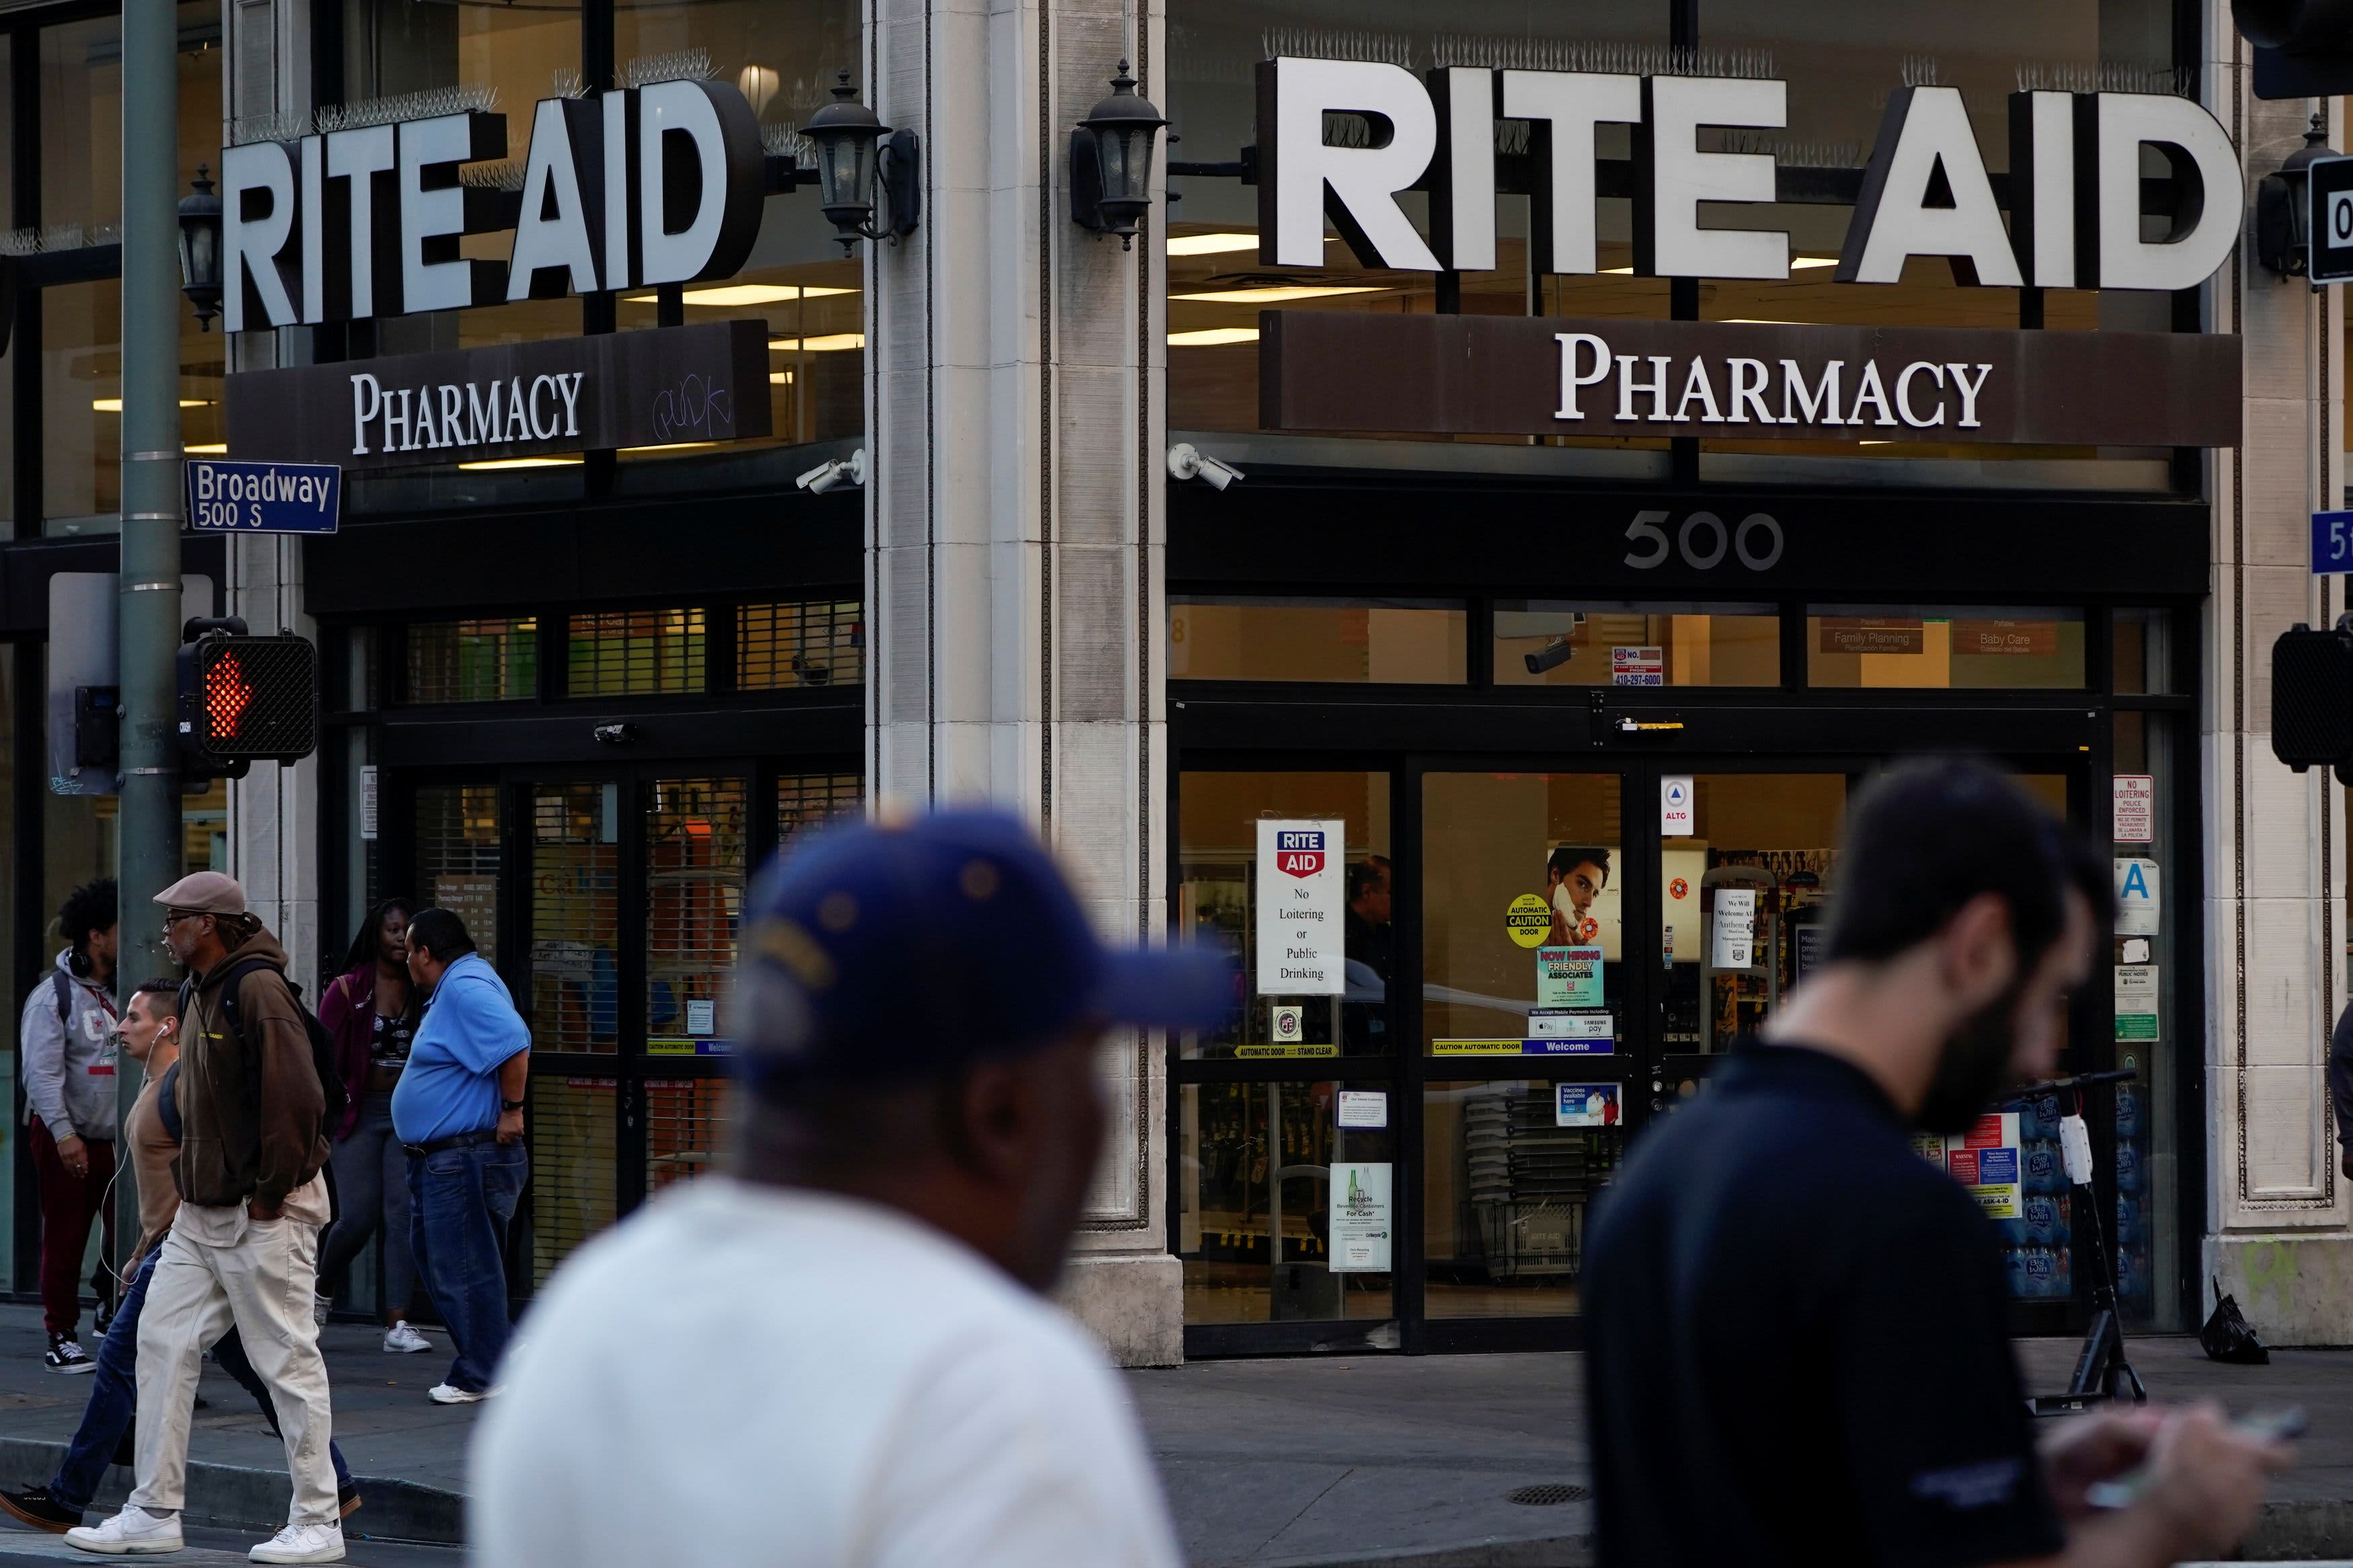 Rite Aid CEO Expects States to Reach Retailers to Accelerate Covid Vaccine Launch